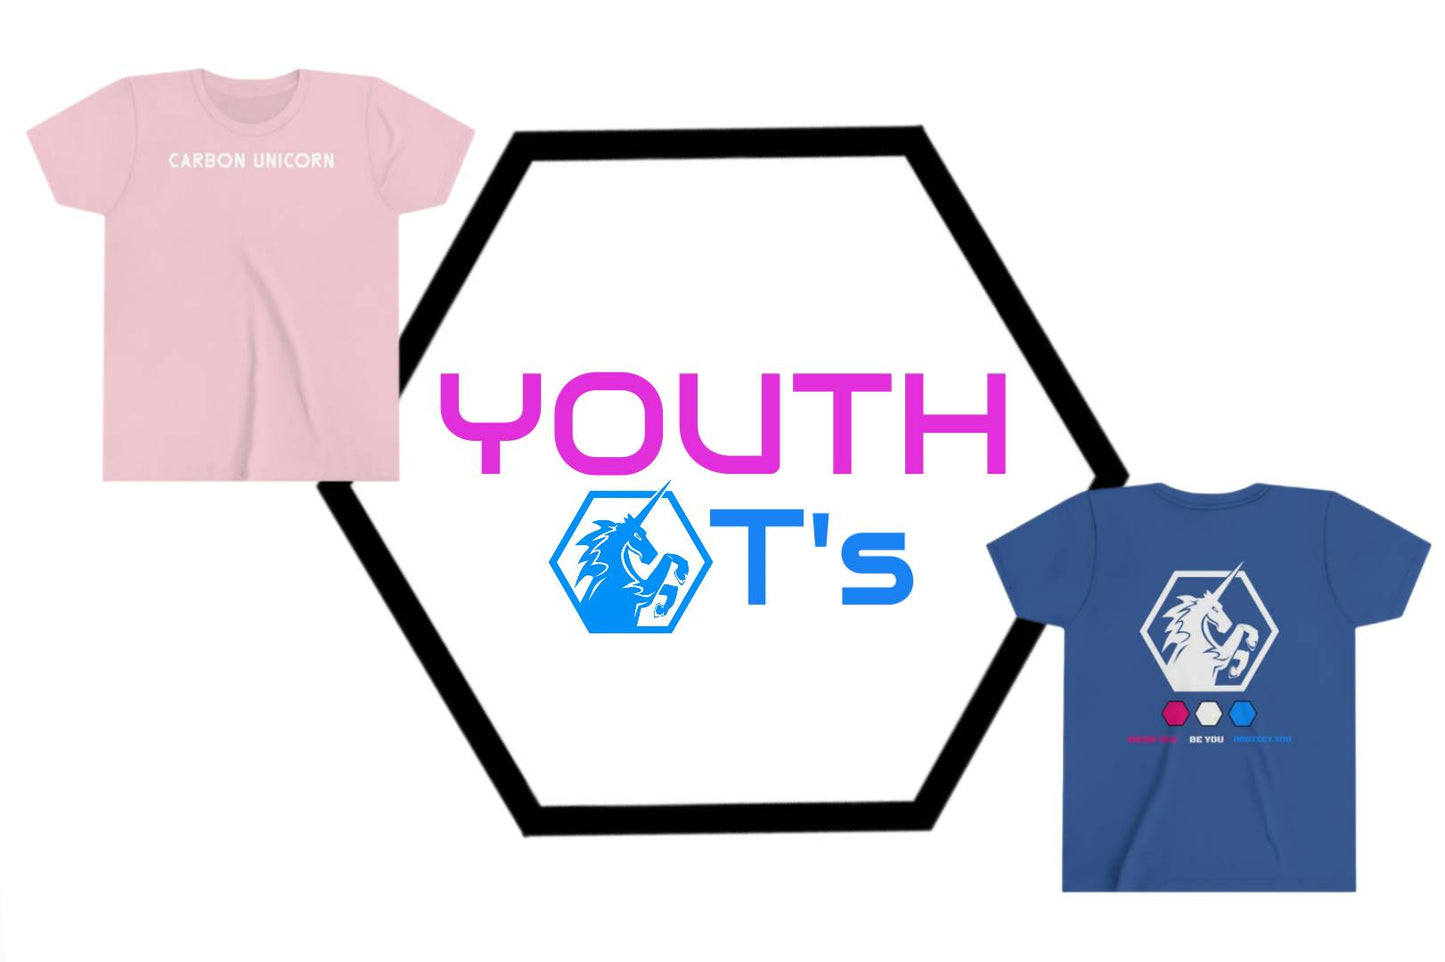 Shirt's for the Youth!